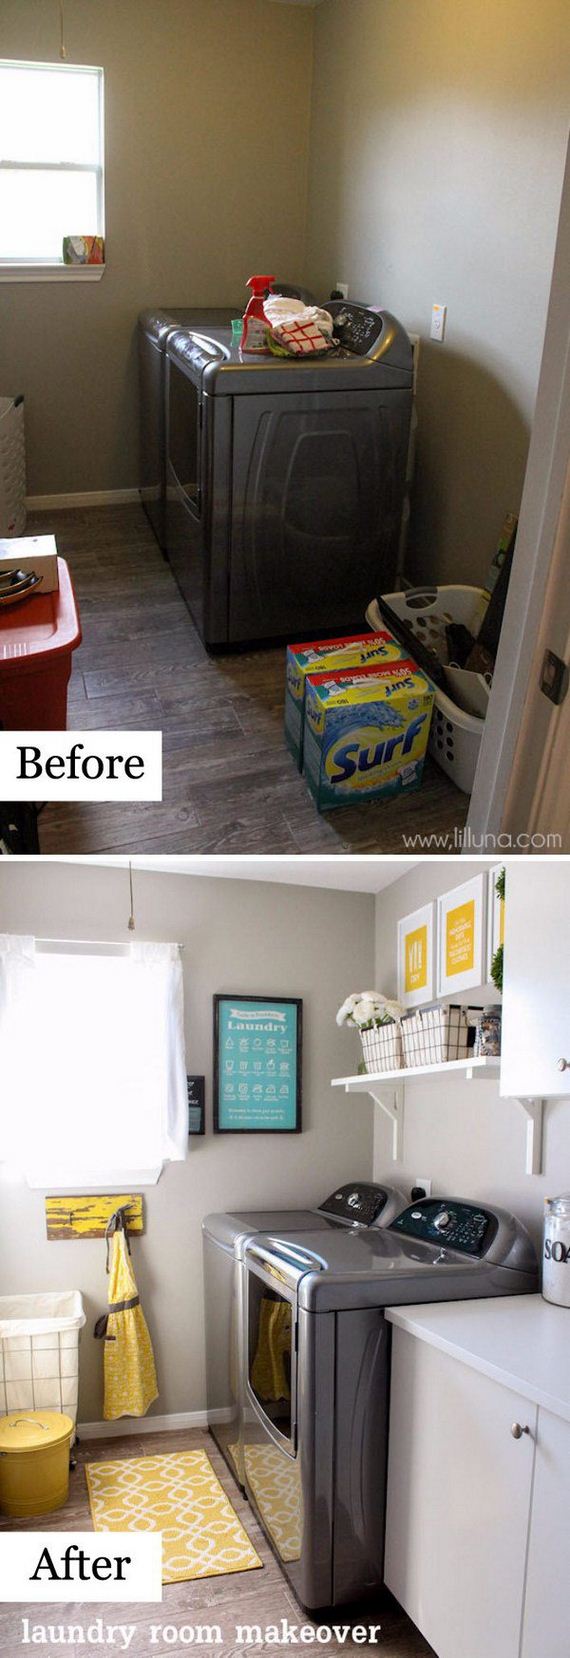 19-before-laundry-room